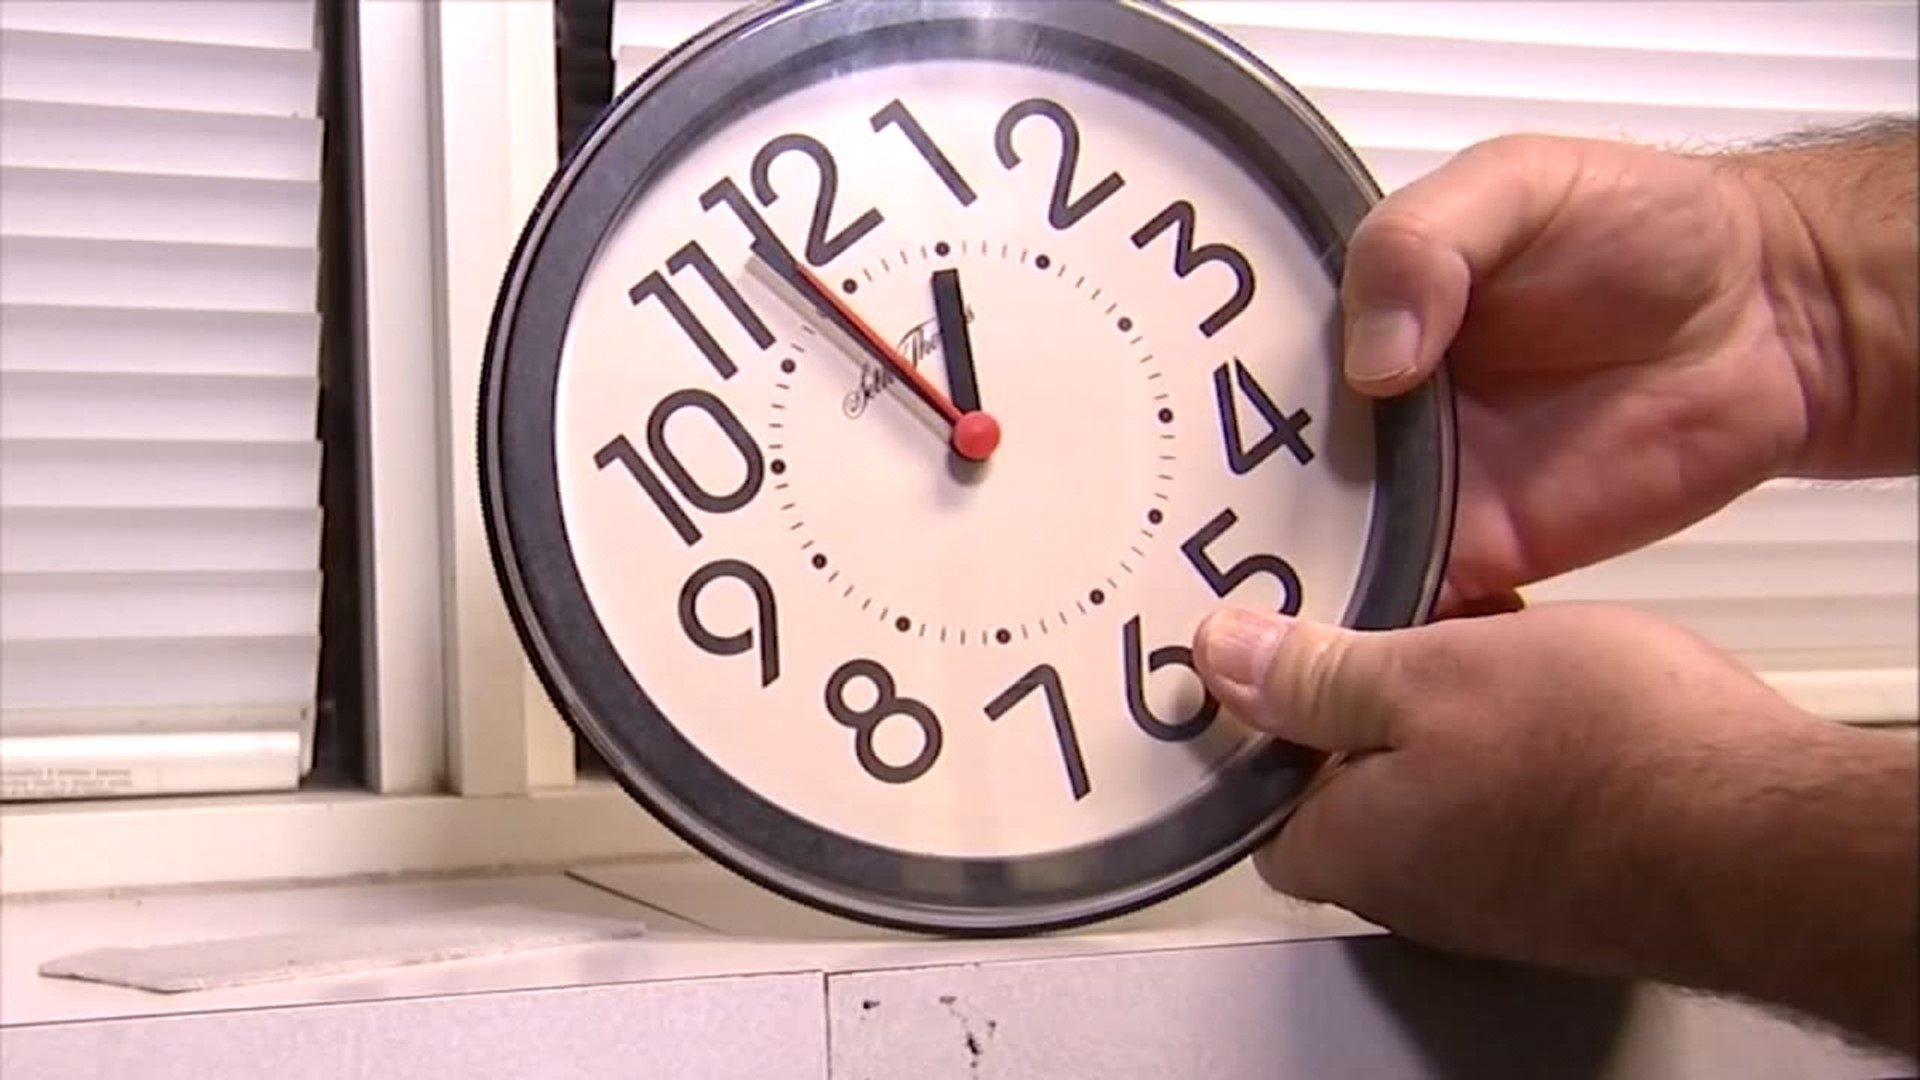 Americans move their clocks forward overnight. It's not all that popular, and doctors say it could have a negative impact on our health.